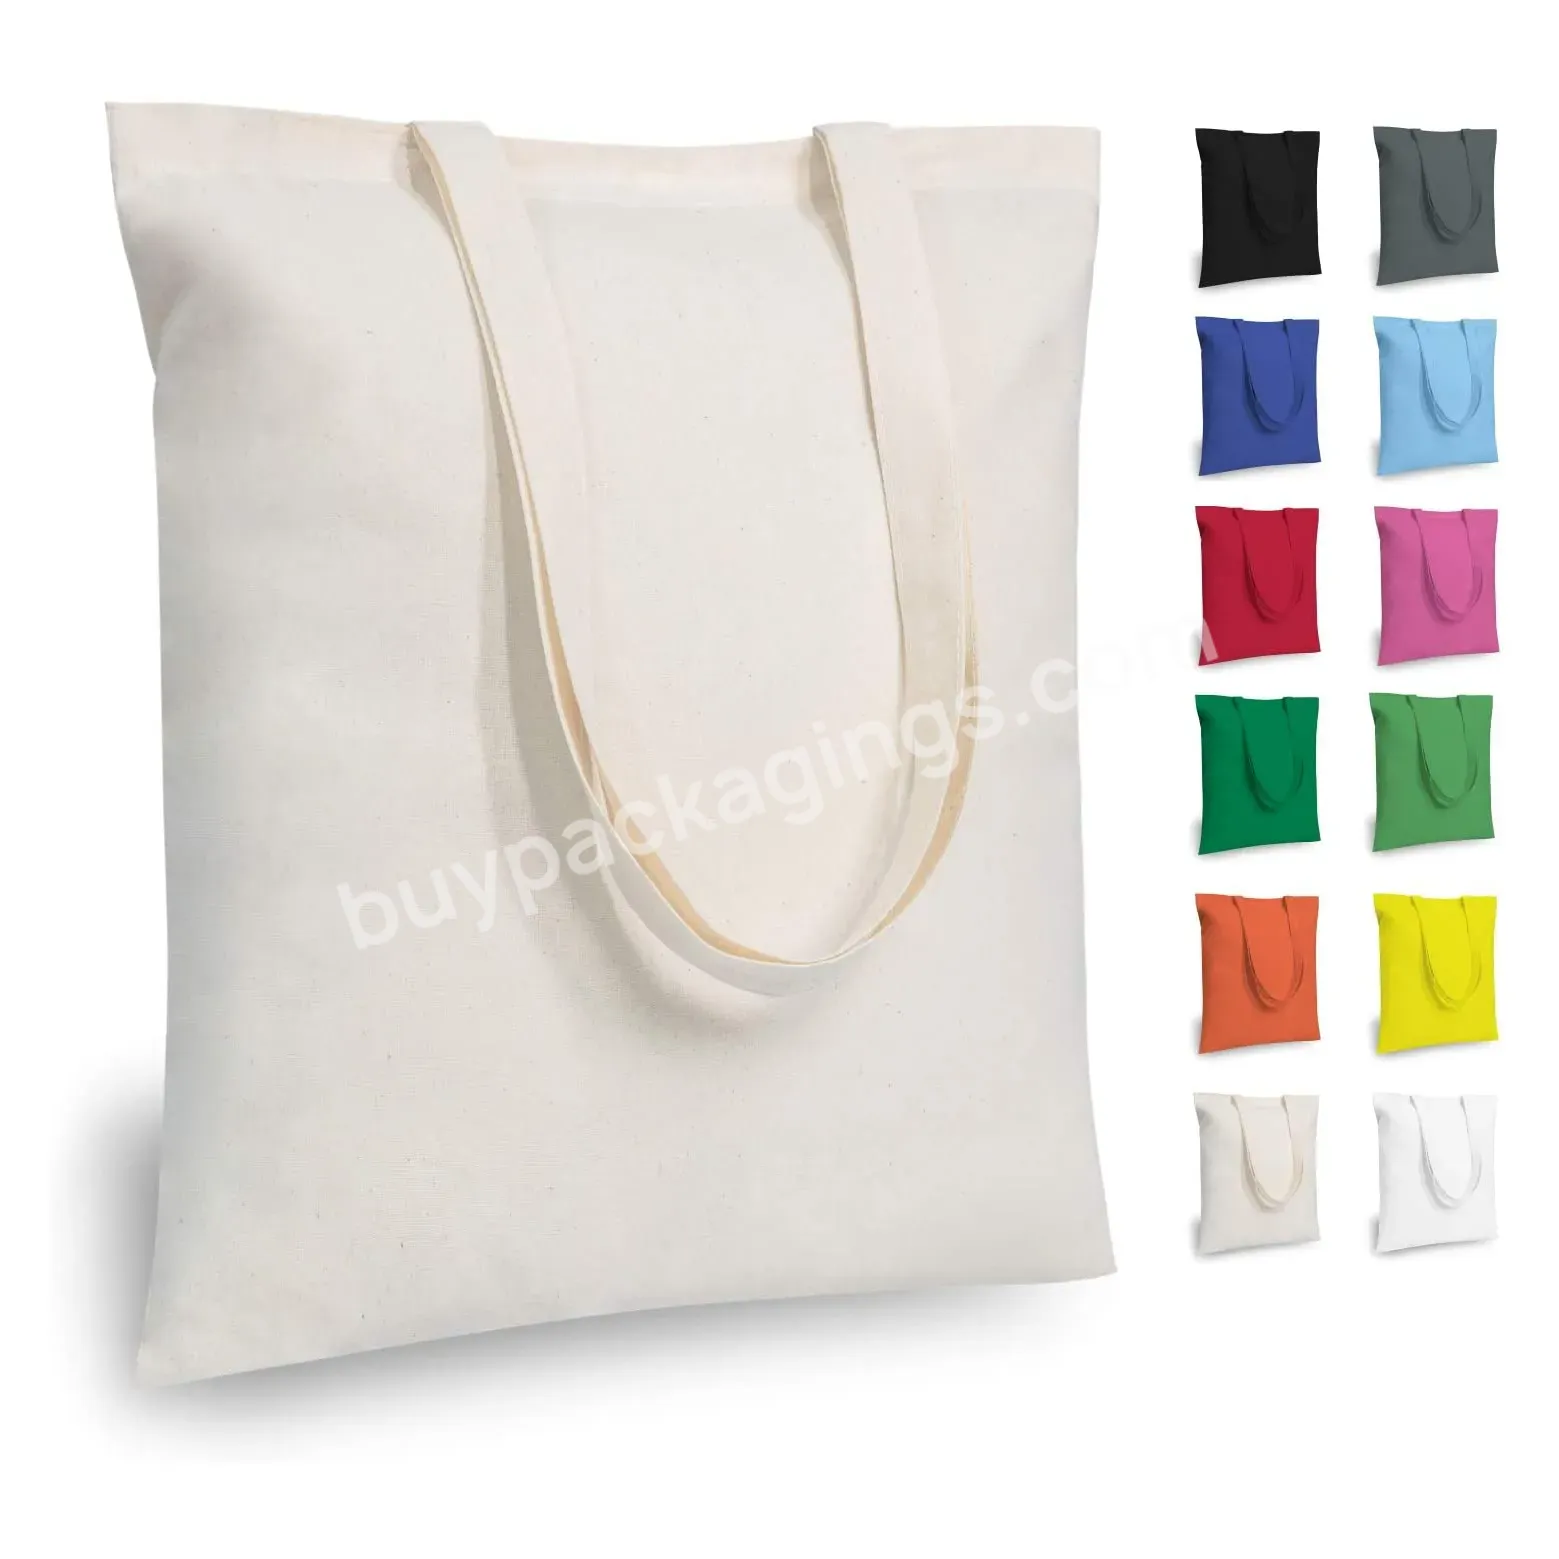 New Promotion Textile Packaging Hot Style Canvas Tote Bag Cotton Tote Bags Cotton Canvas Tote Bag - Buy Canvas Tote Bag,Textile Packaging,Cotton Canvas Tote Bag.